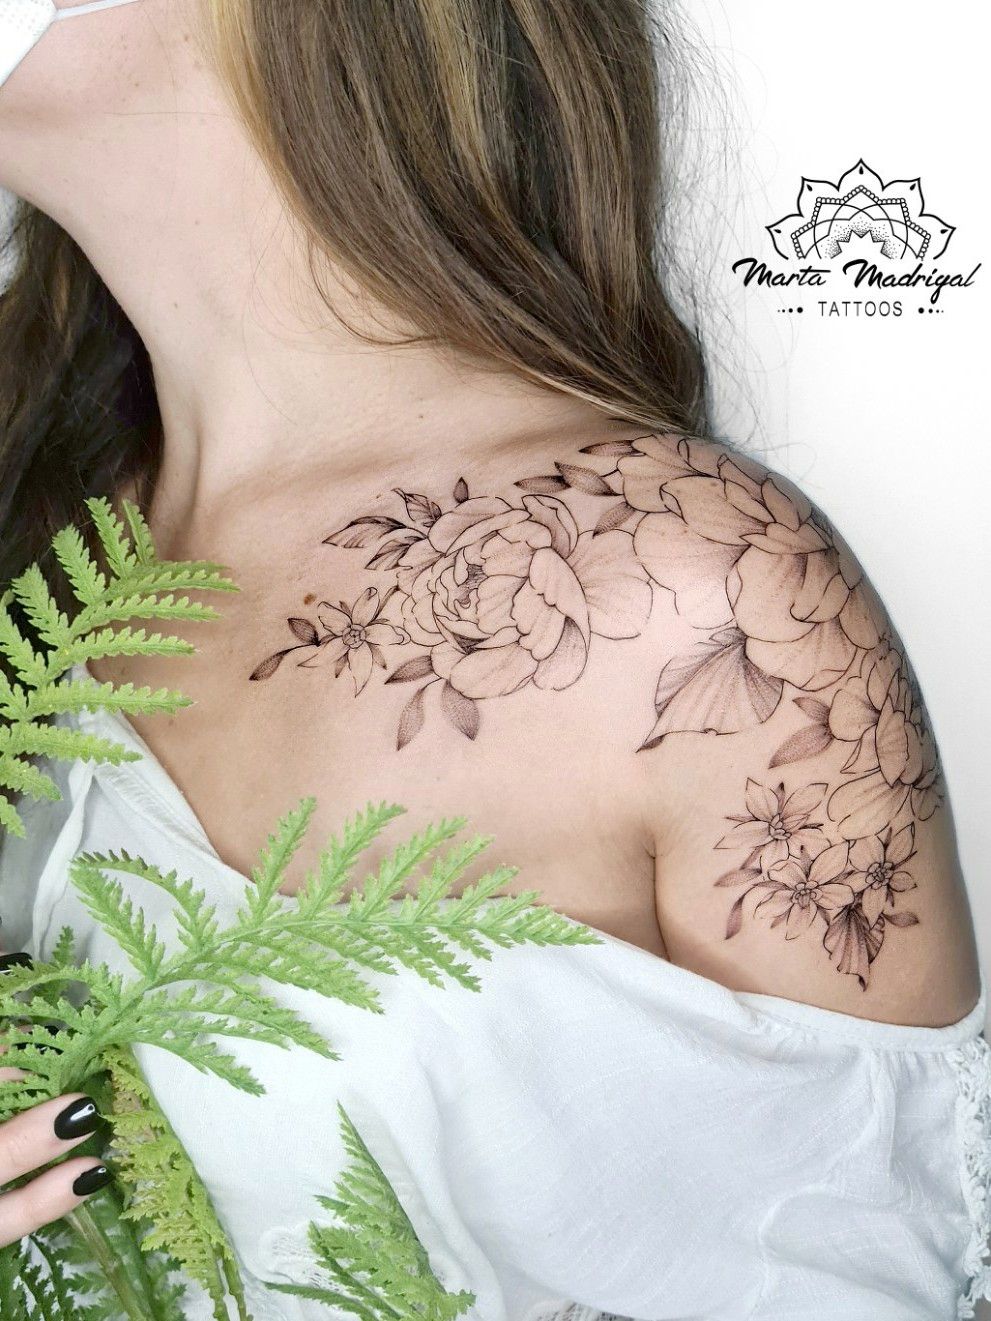 54 Gorgeous Shoulder Tattoos For Women